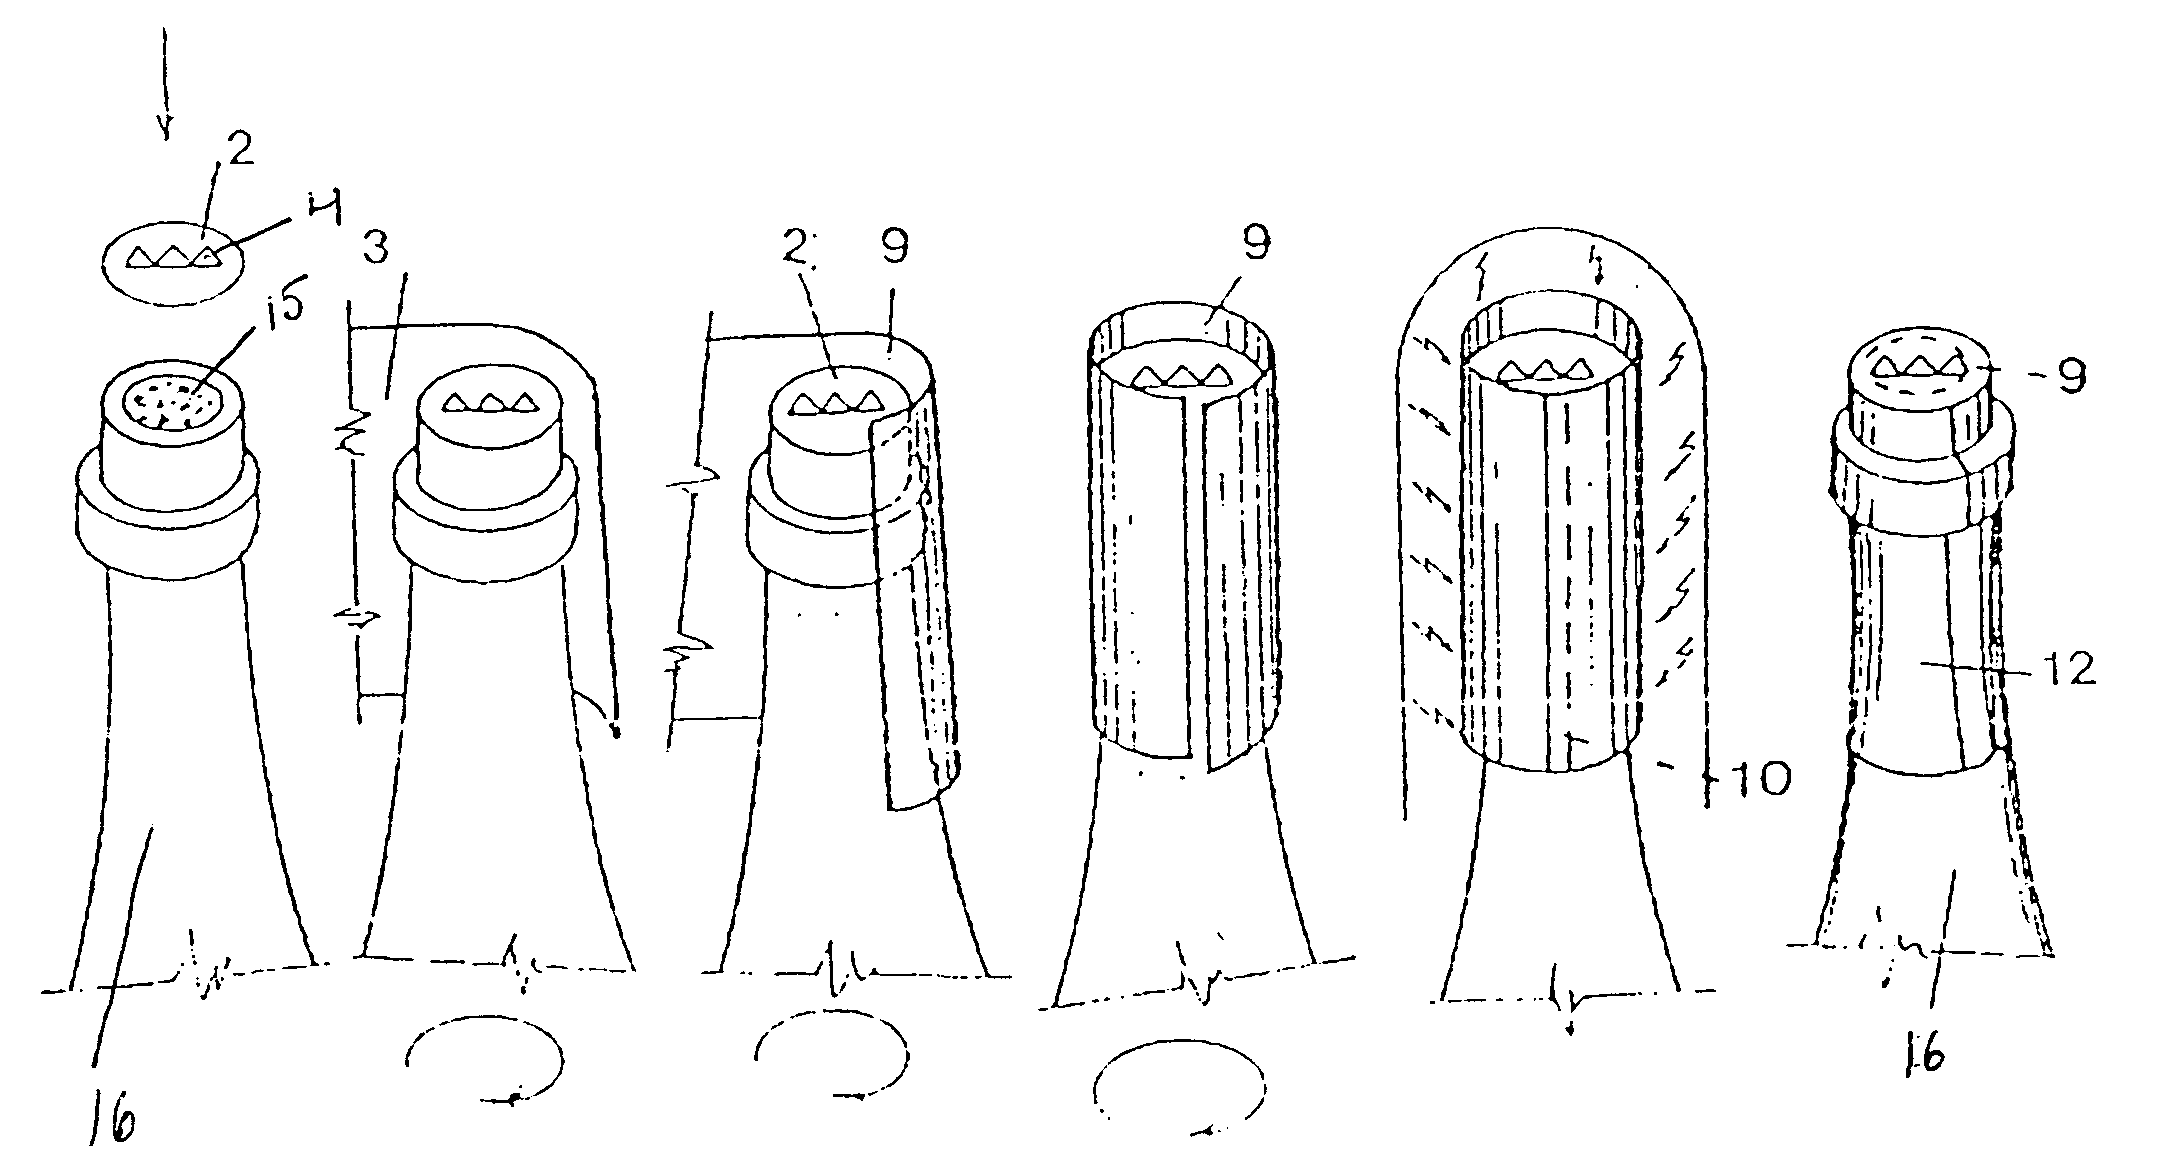 Capsules for bottles and other containers